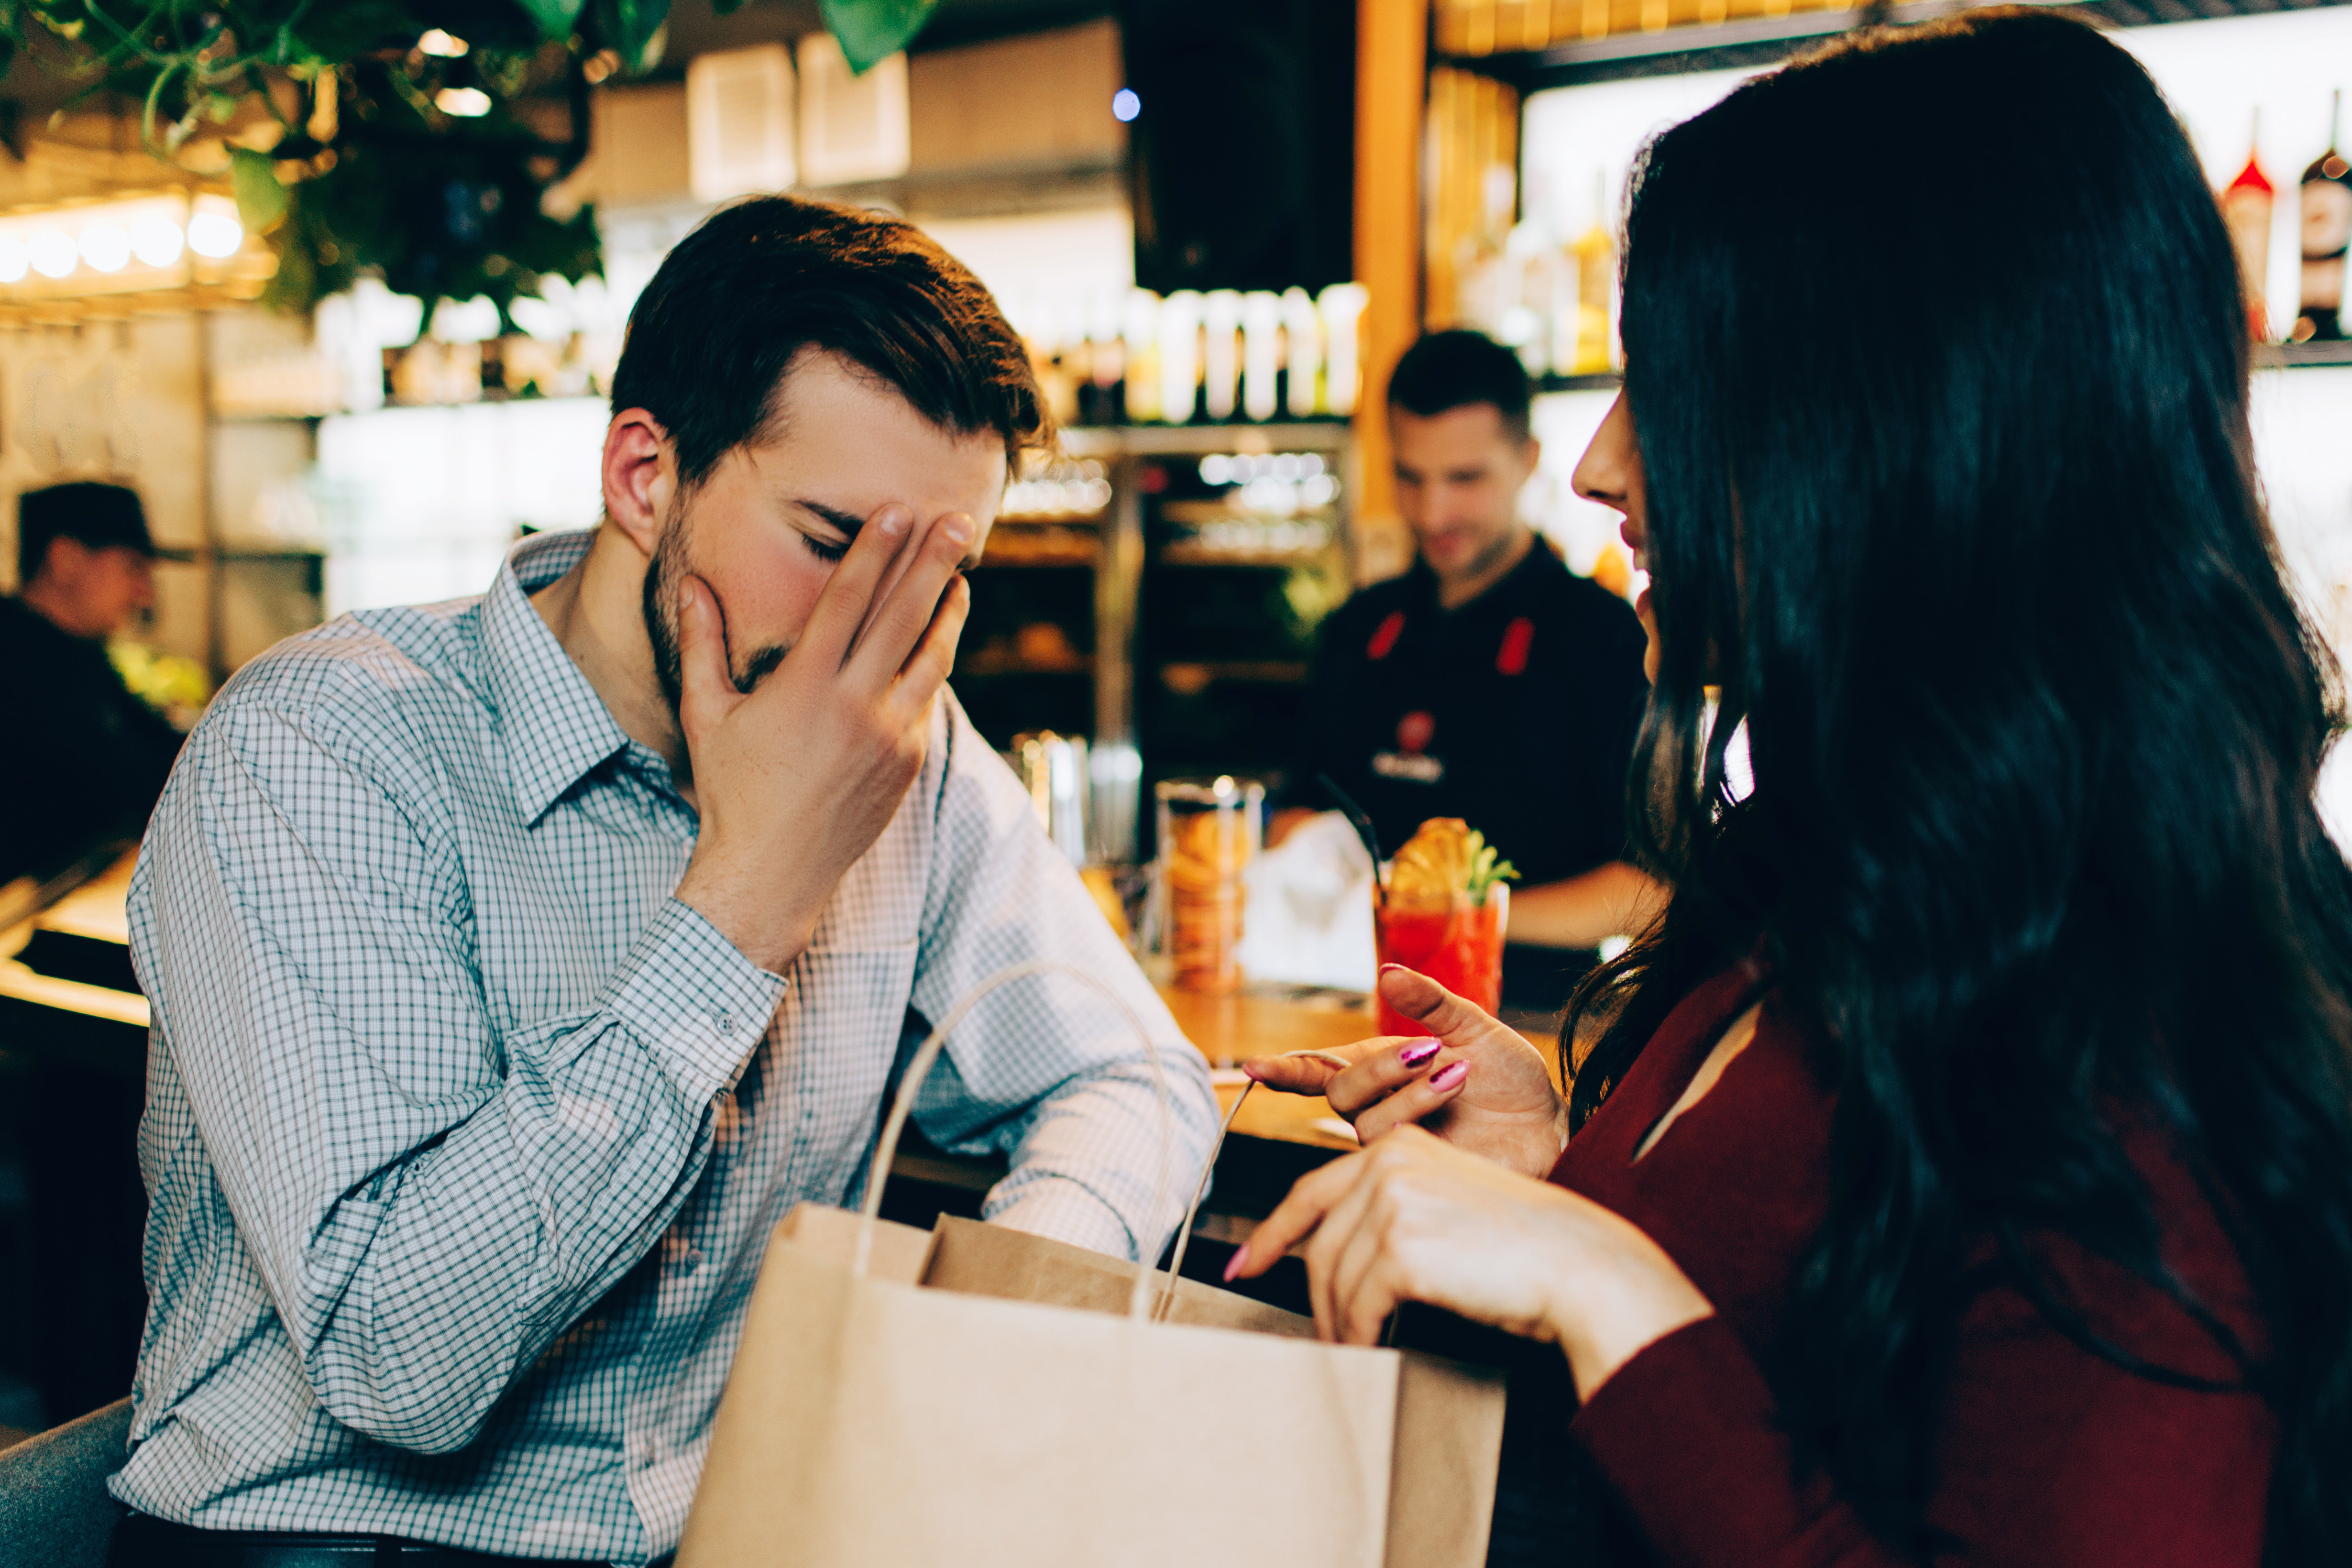 A man looking displeased with his hand on his face while talking to a woman at a restaurant | Source: Shutterstock